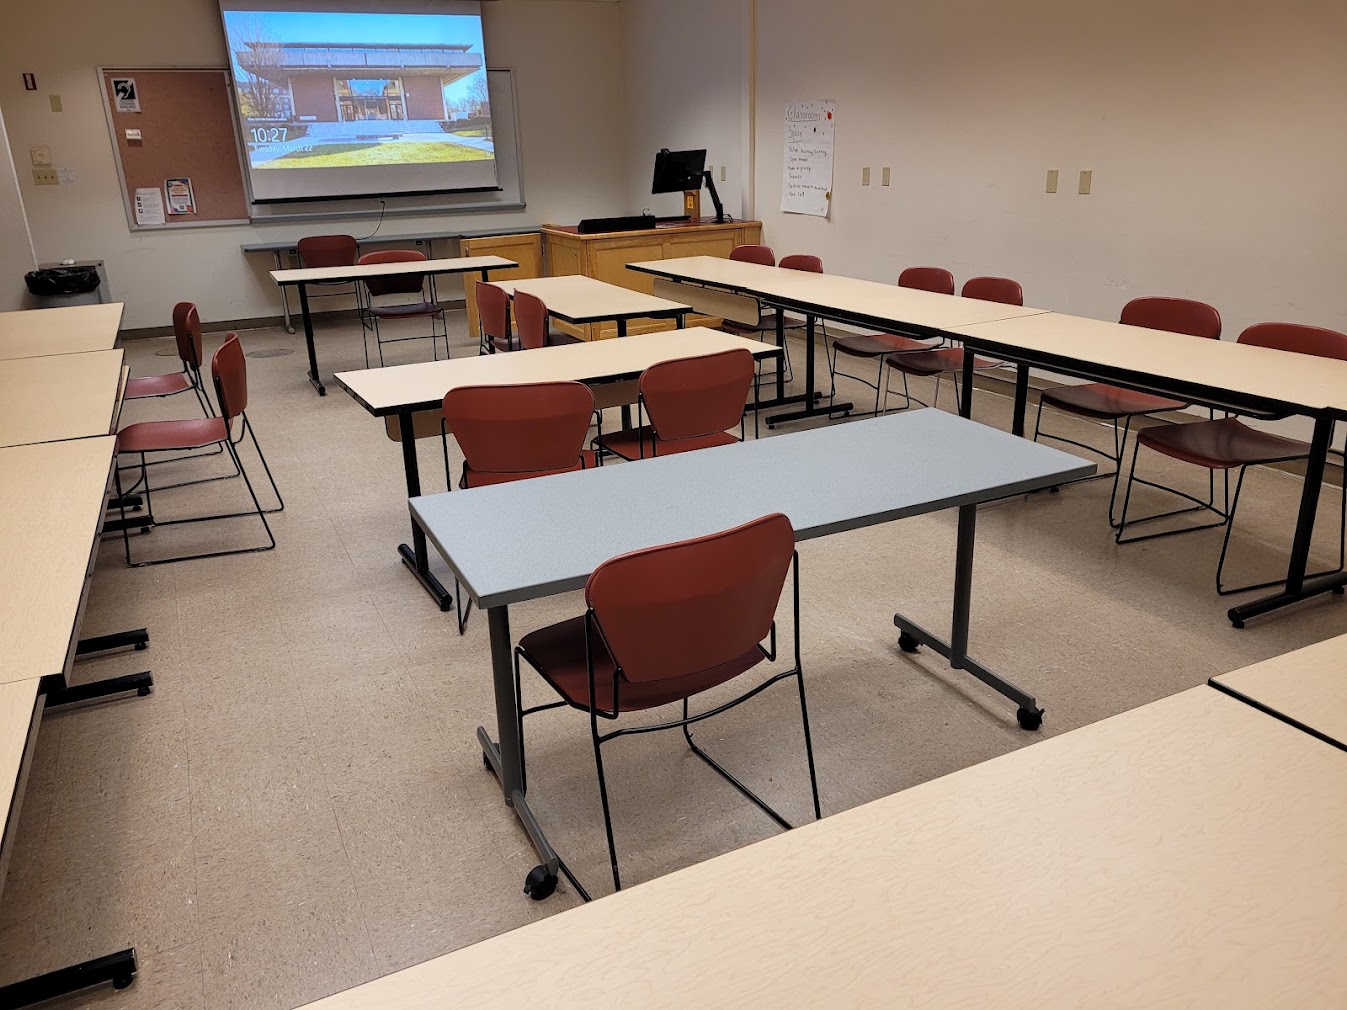 A view of the classroom with moveable tables and chairs, whiteboard, projection screen, and instructor table in front.